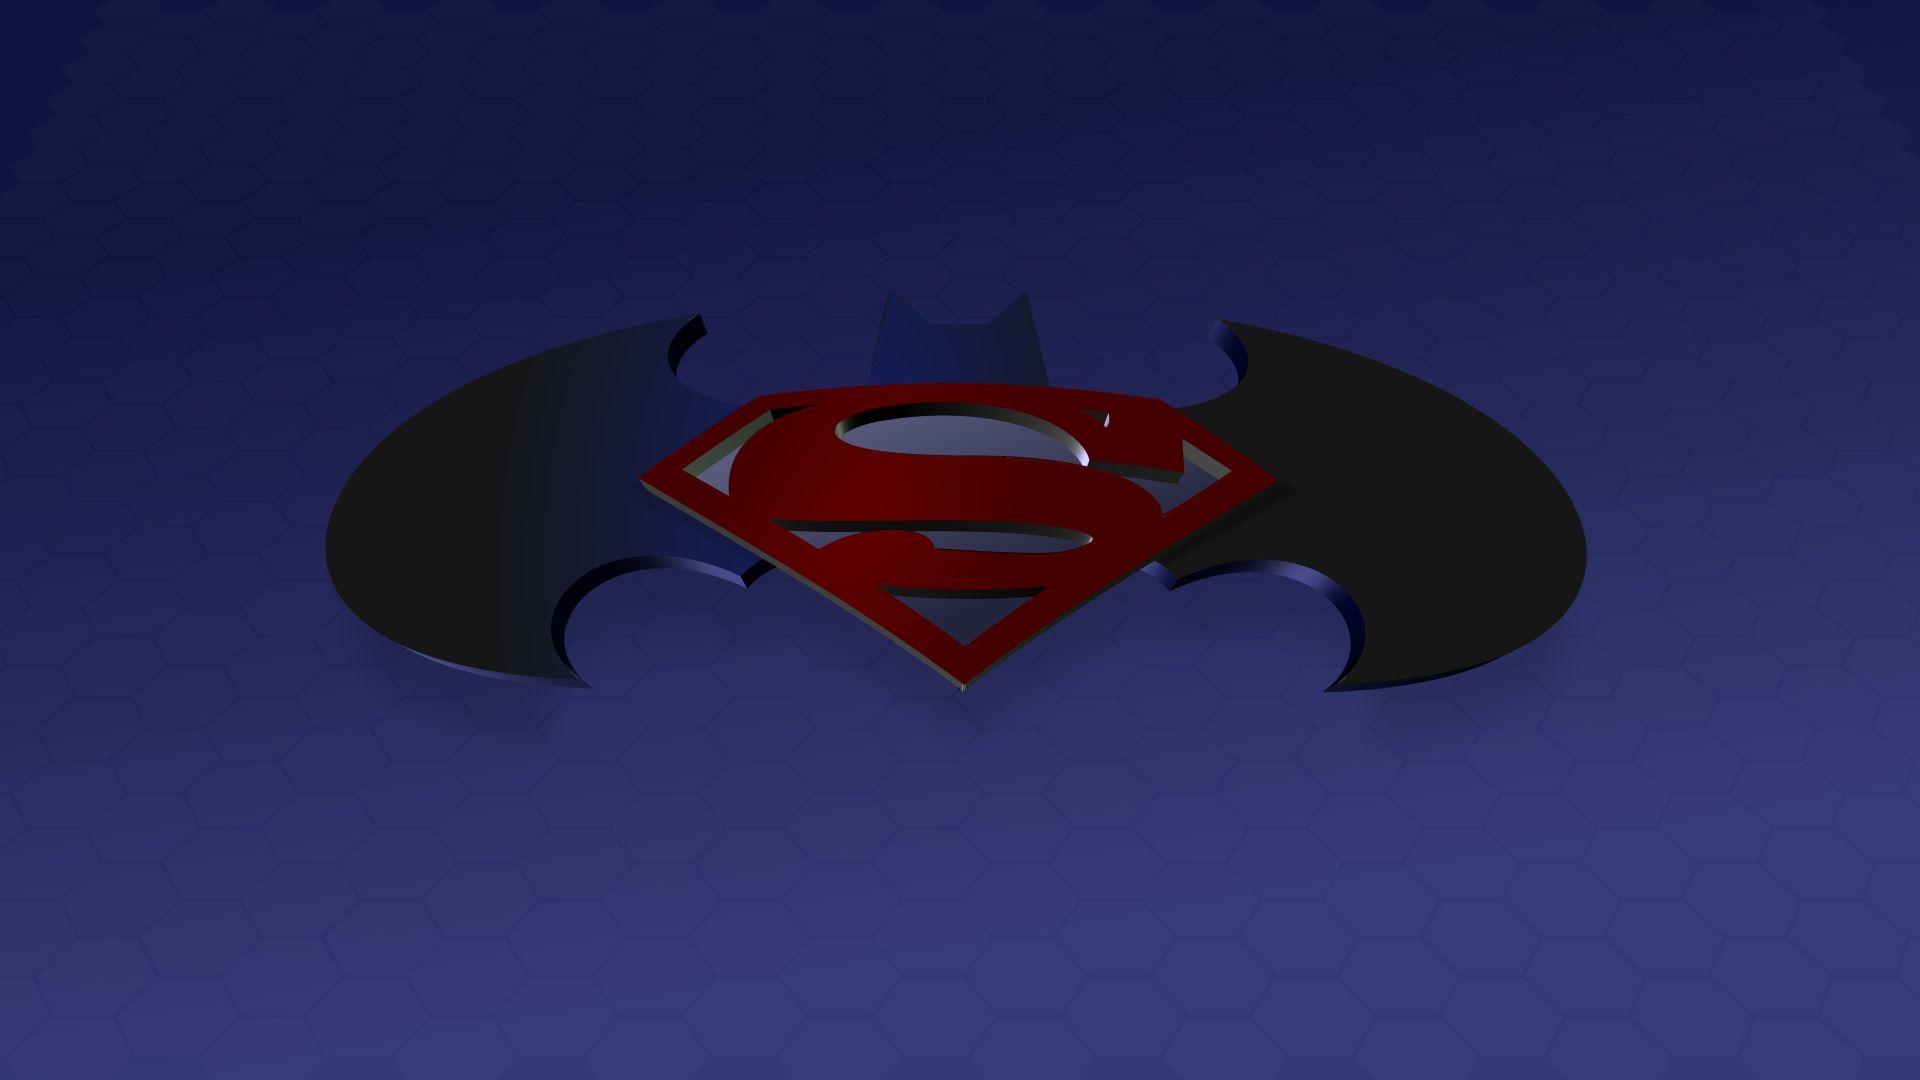 1340167 Superman Logo wallpapers HD free wallpapers backgrounds